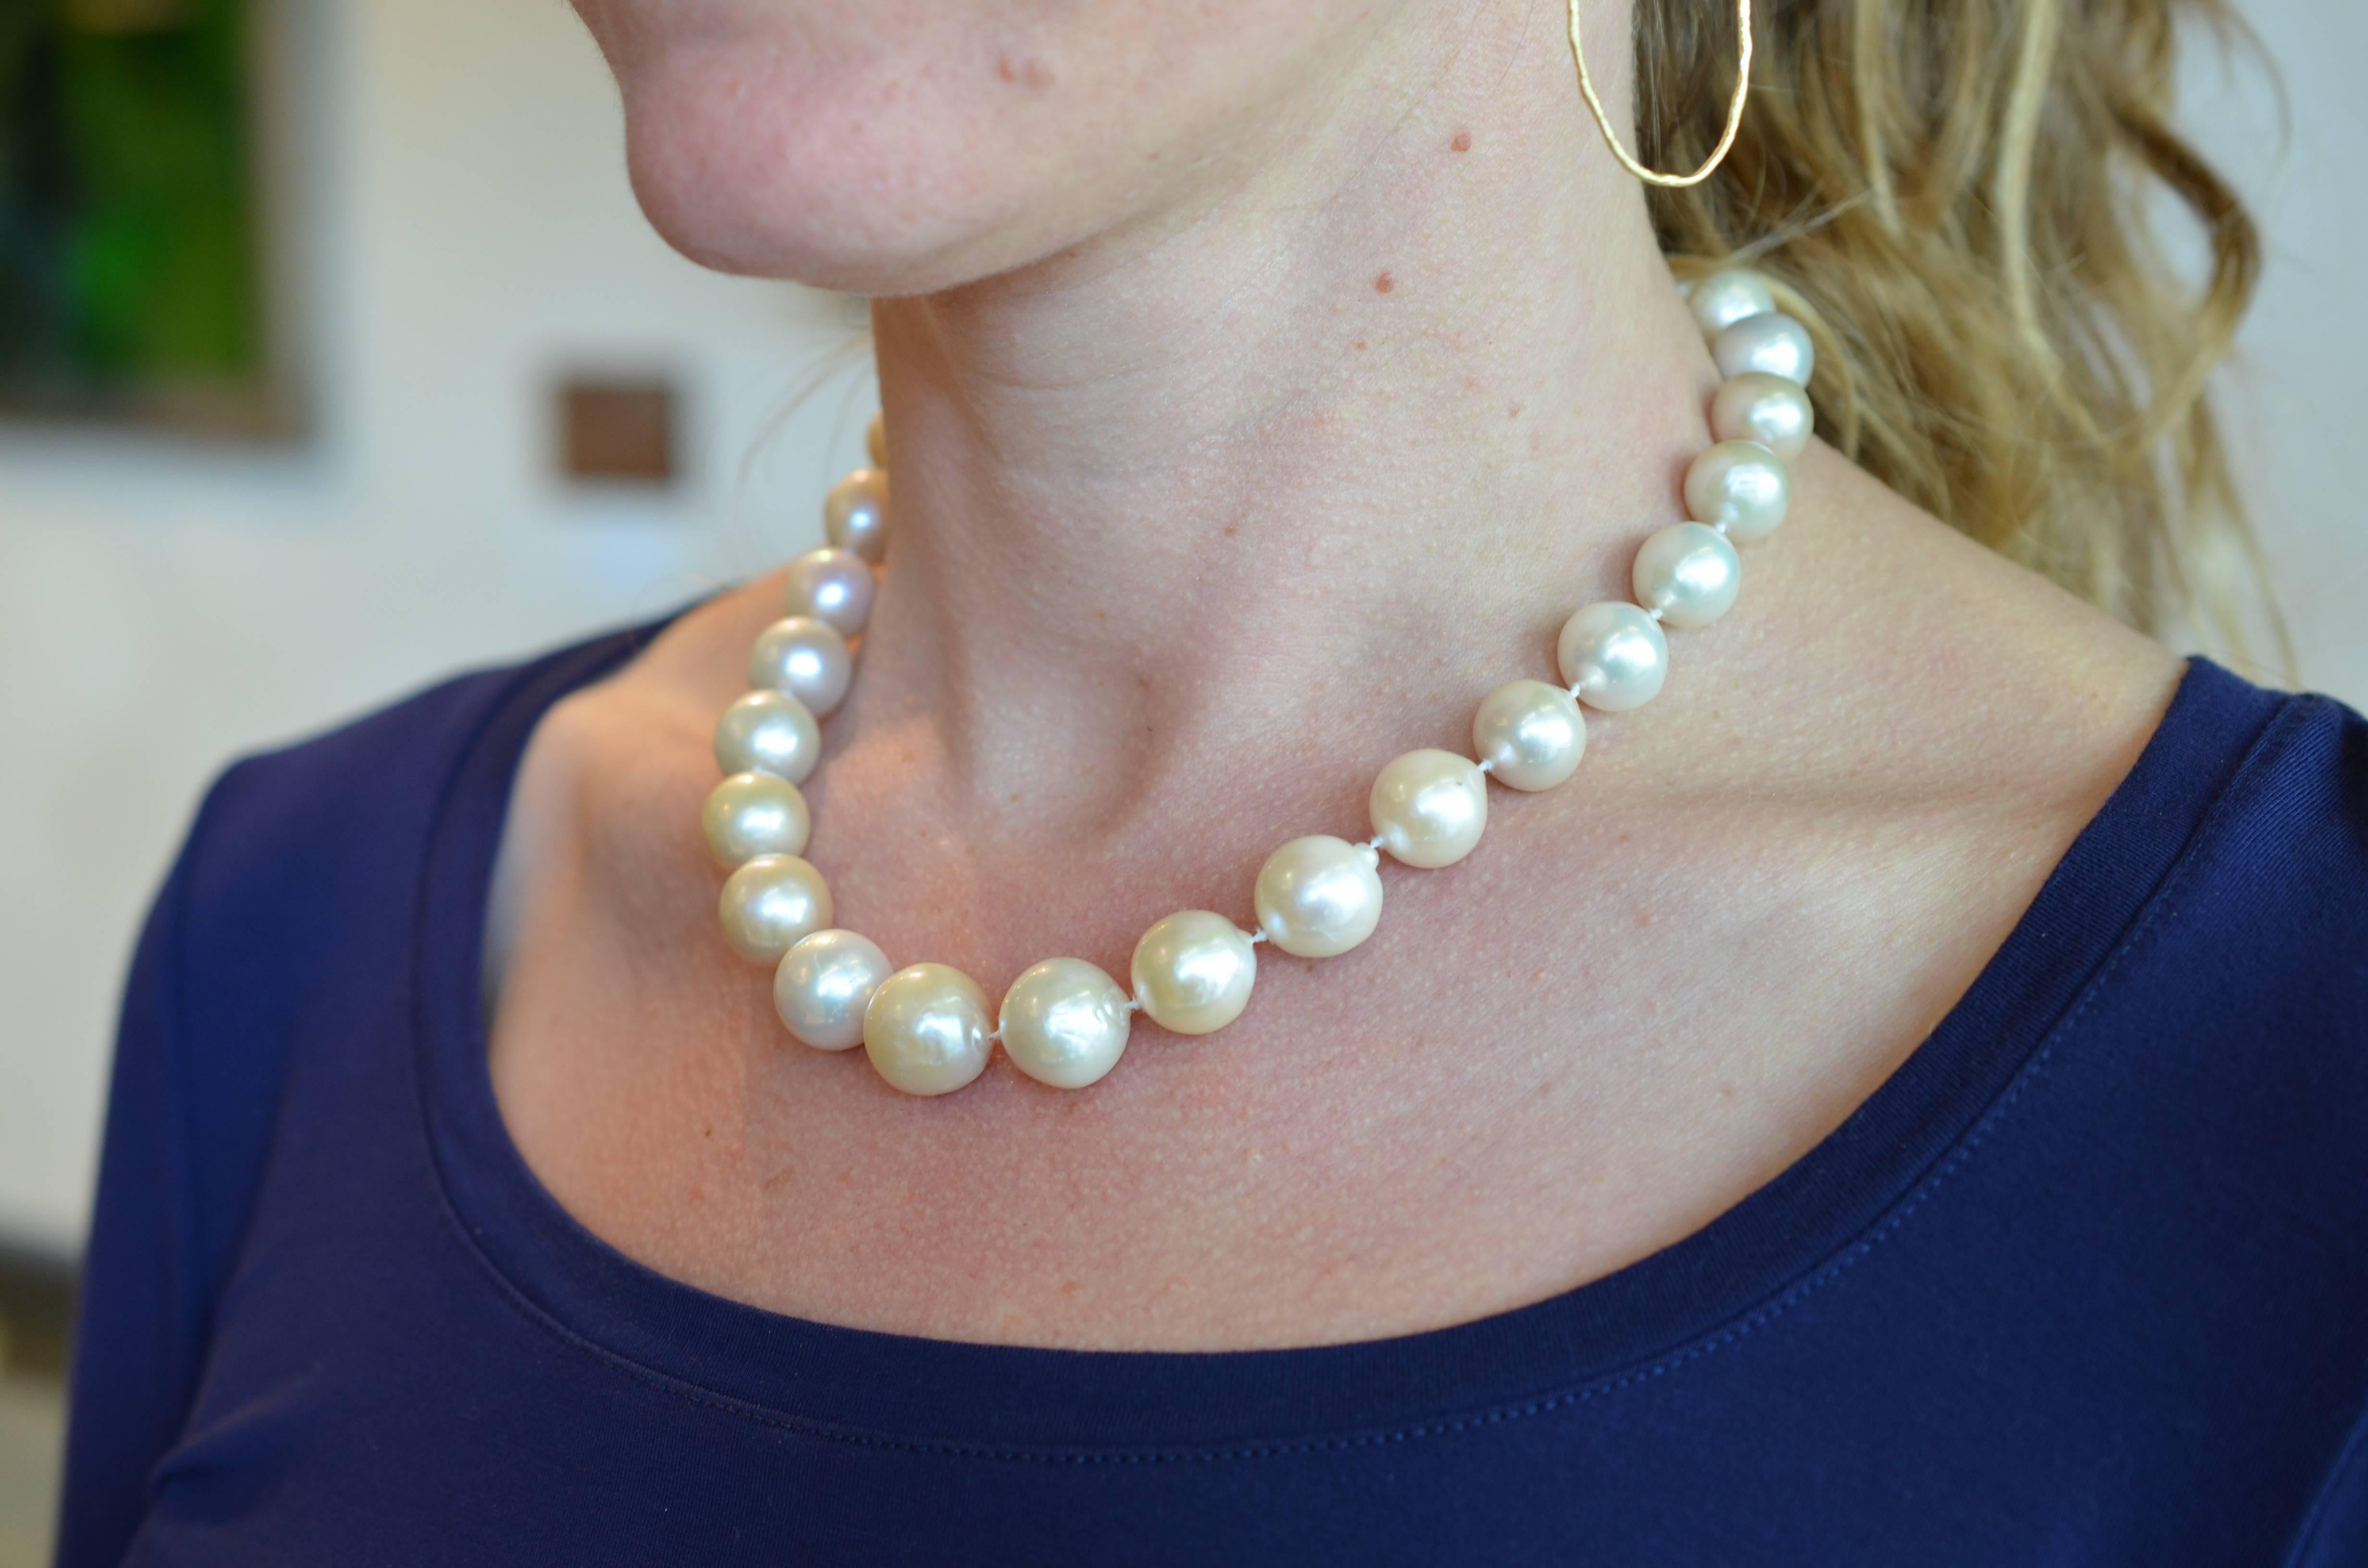 Large Fresh Water Pearl Necklace in Light Peachy Pink and Silver Hues Gold Clasp 3